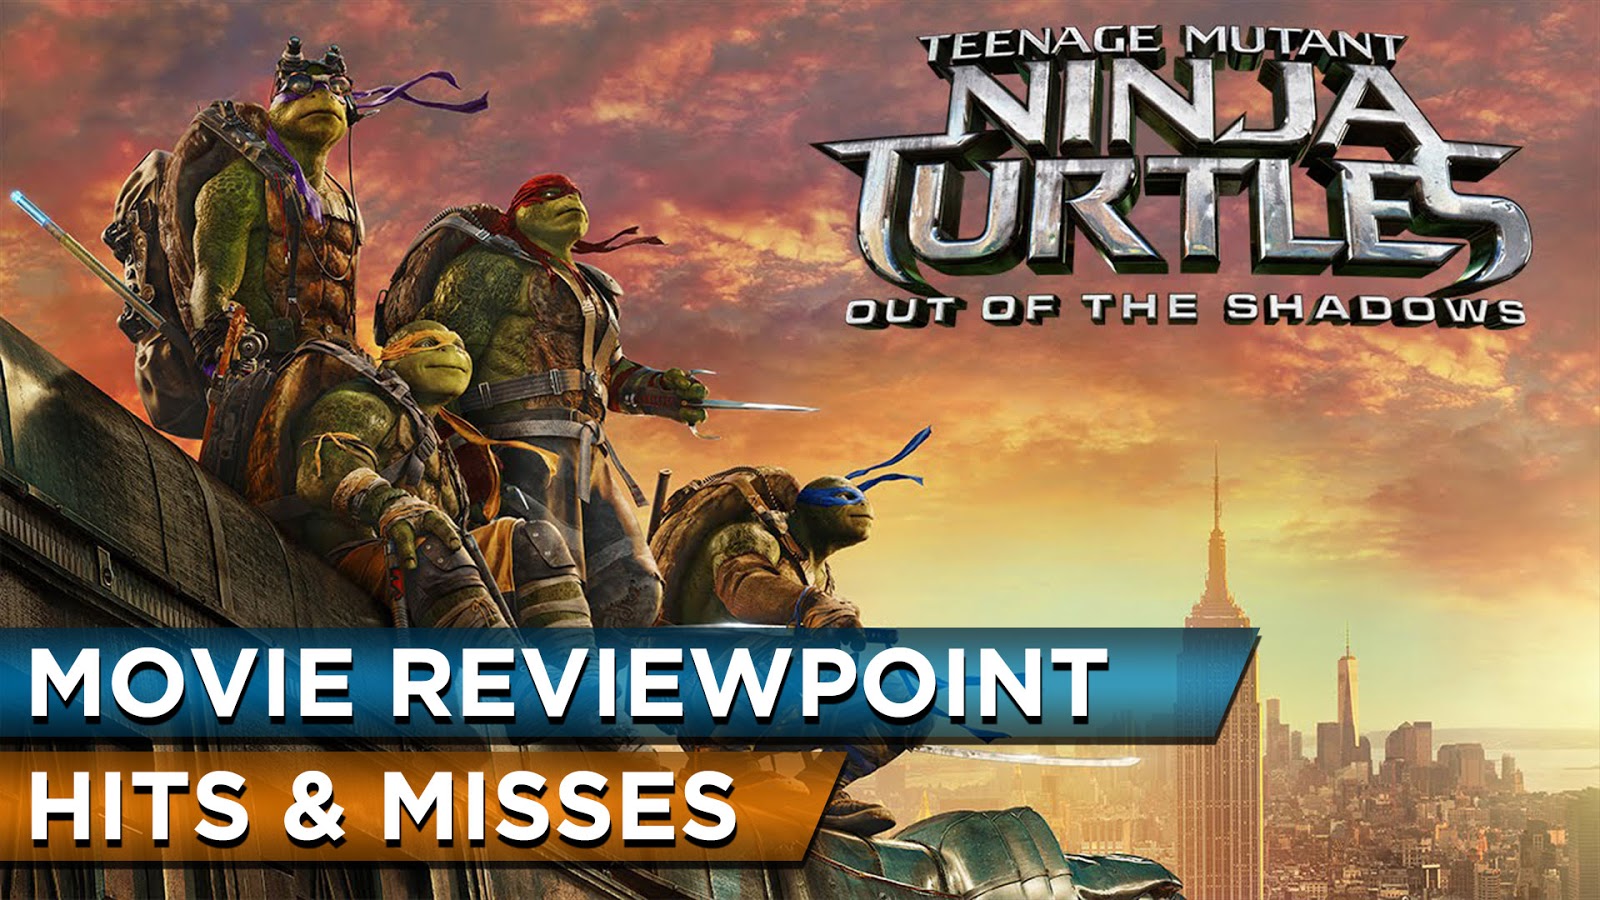 movie review Teenage Mutant Ninja Turtles: Out of the Shadows podcast